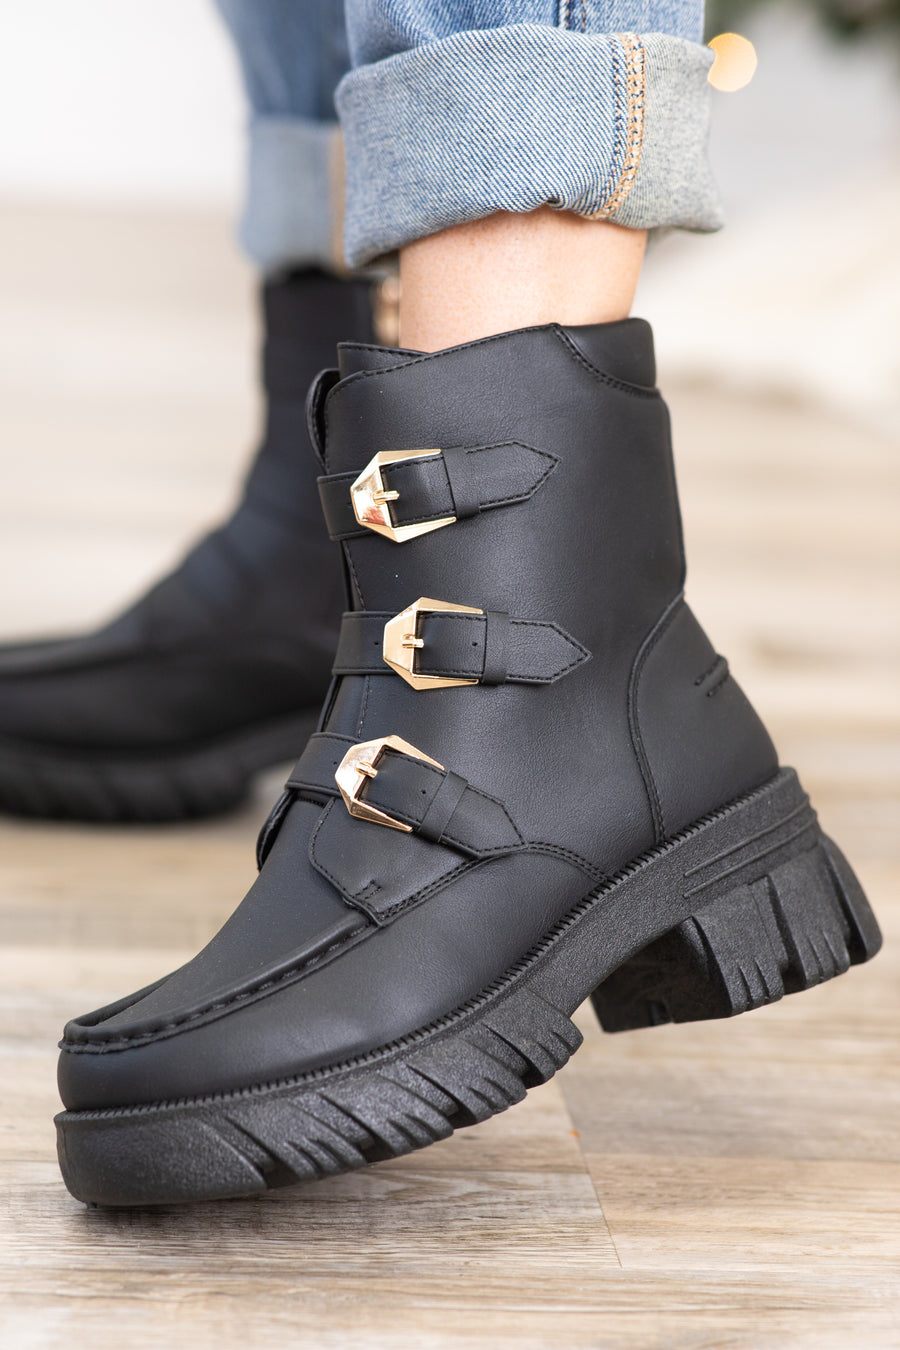 Black Boots With Buckle Detail